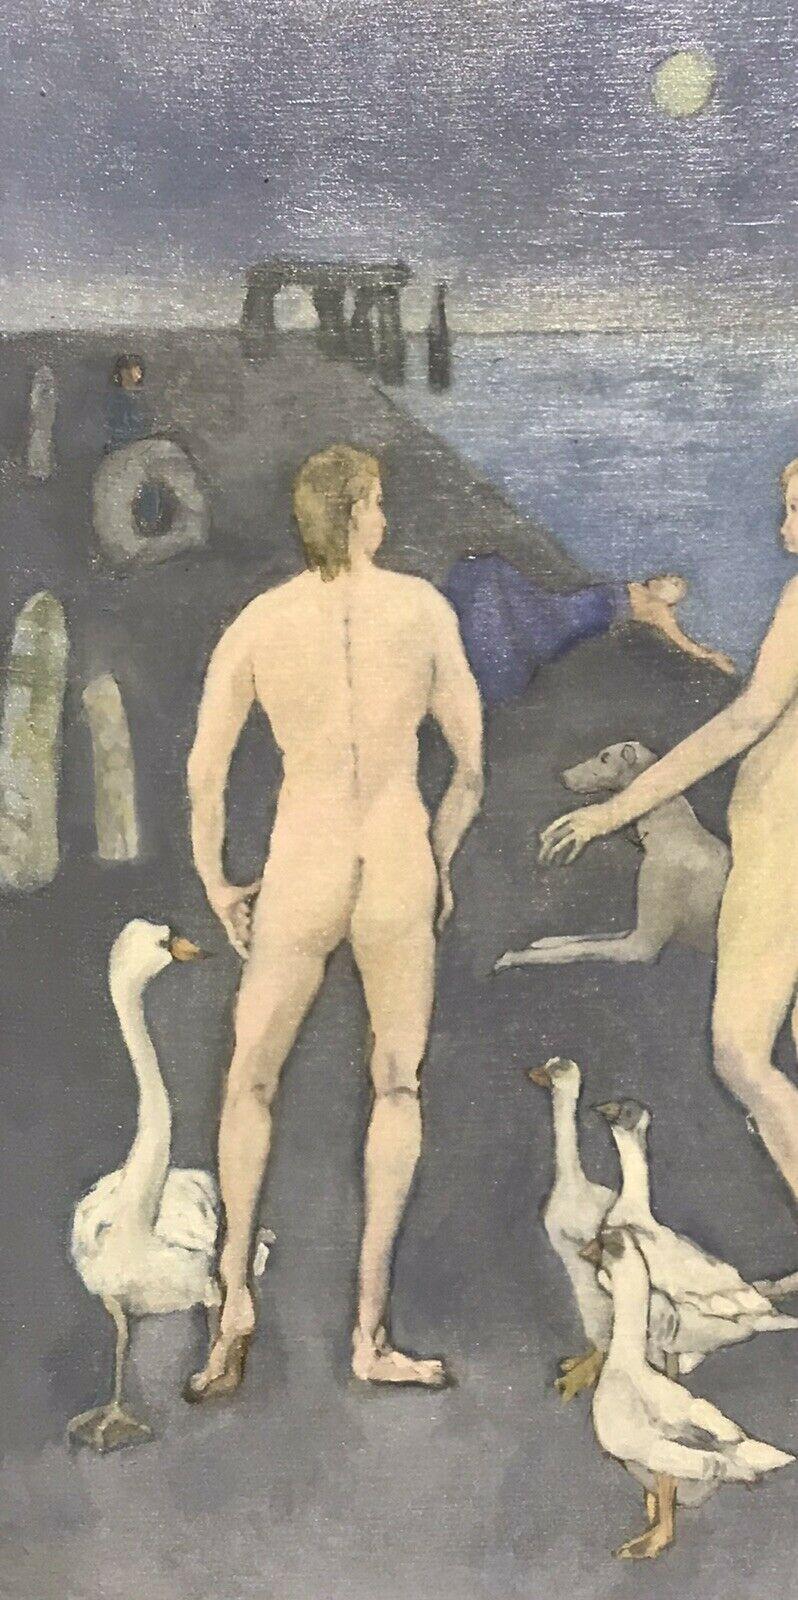 Artist/ School: French School, late 20th century, signed with monogram

Title: Surrealist coastal landscape with nude male and female figures, standing with swans.

Medium: oil painting, on board. 

Size:       frame: 29 x 37.5 inches
          